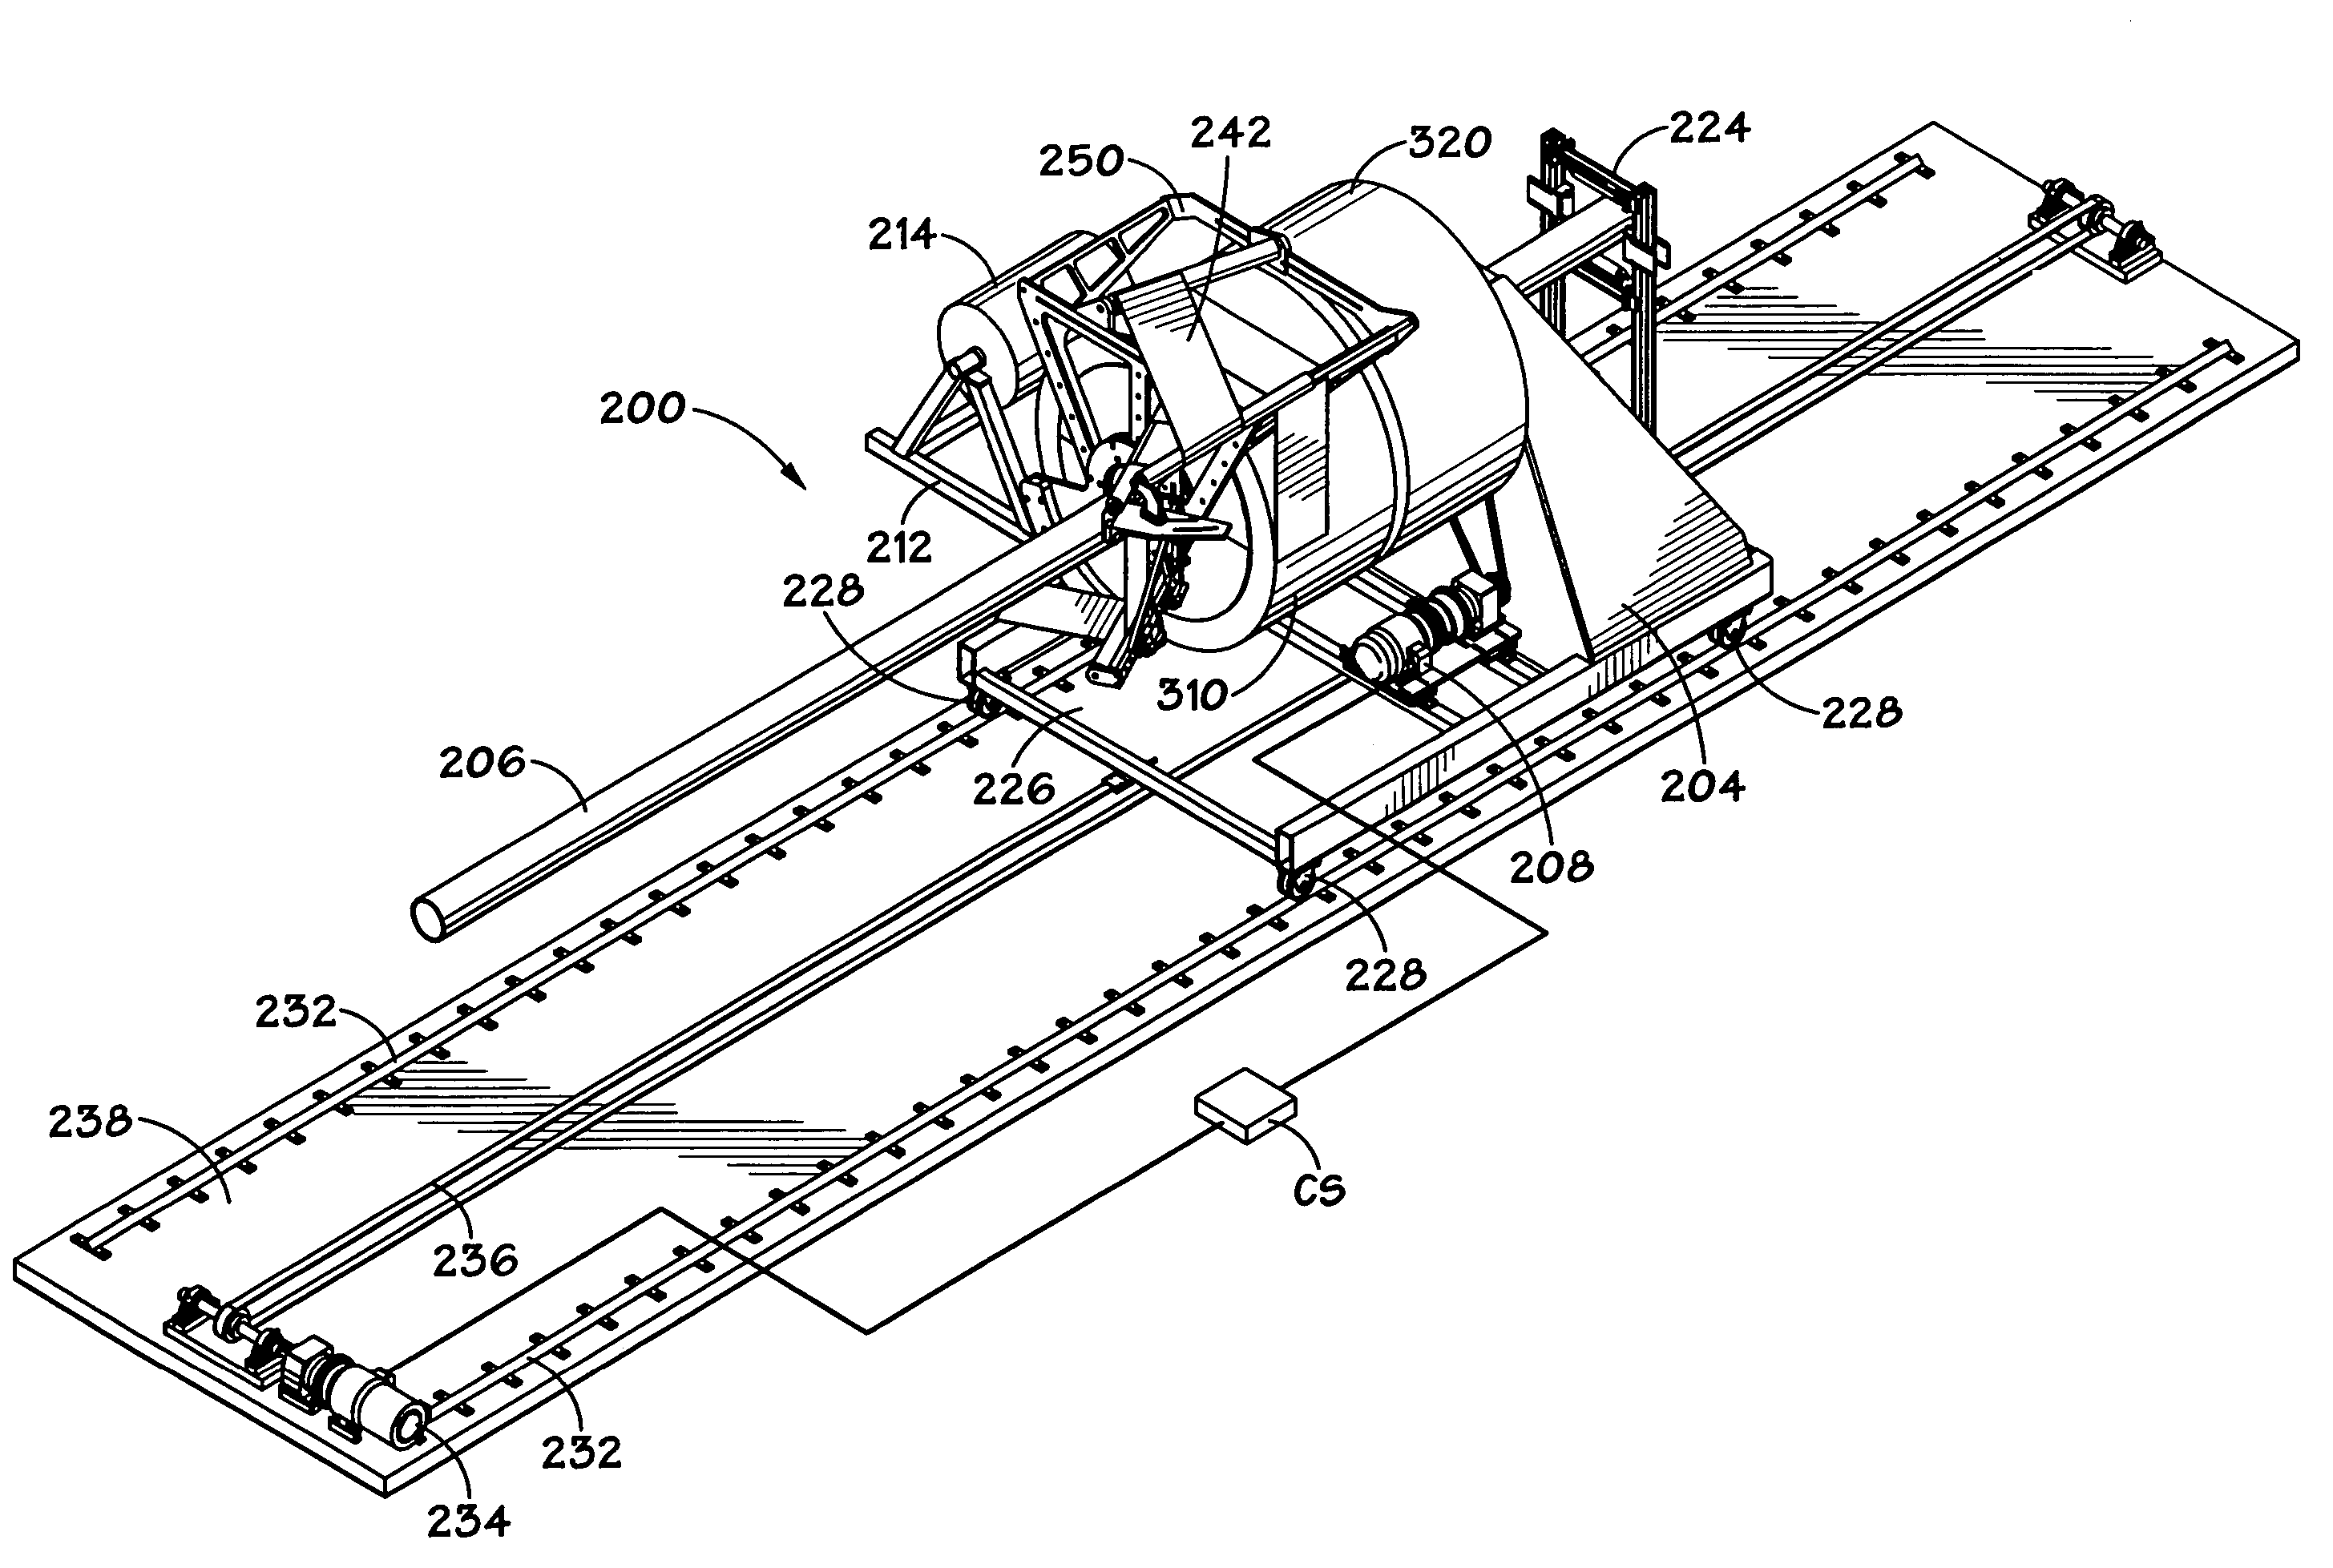 Systems and methods for making pipe liners